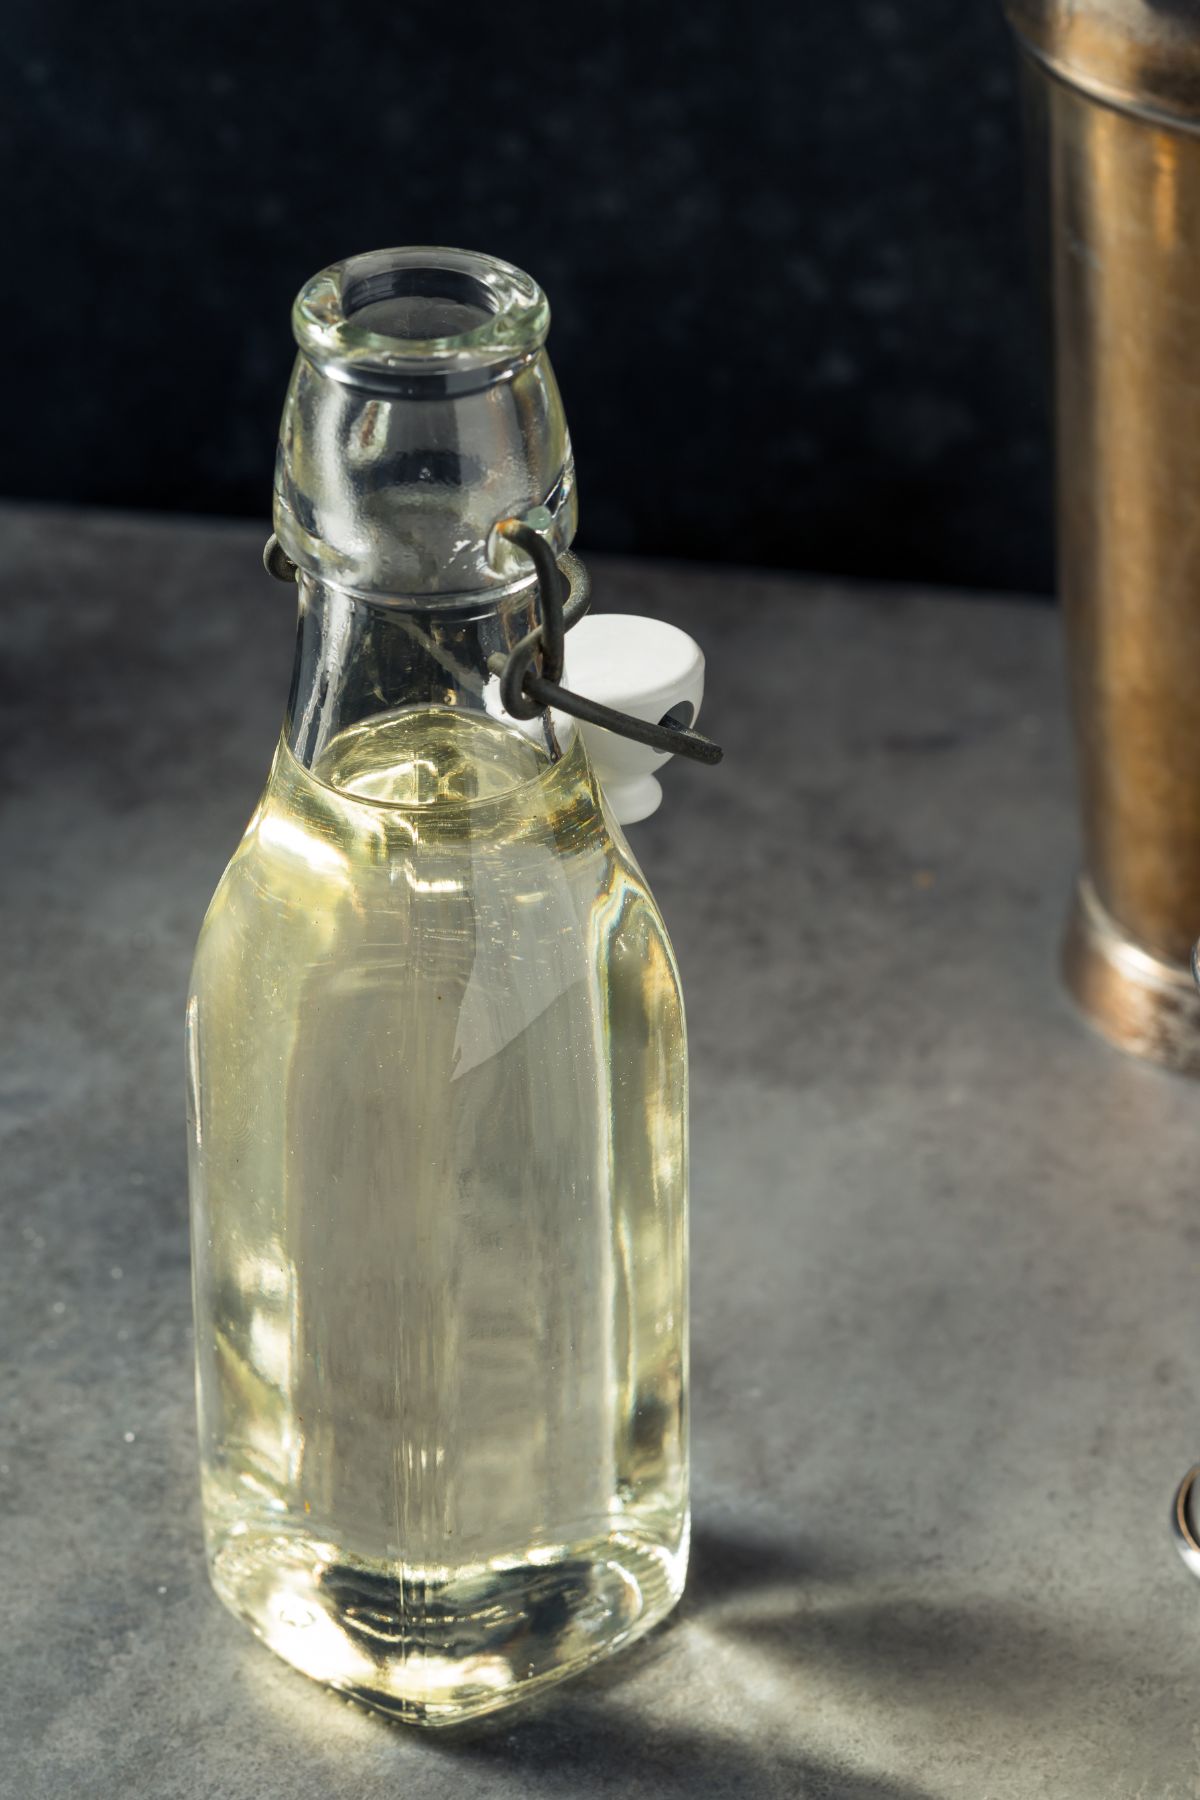 Simple syrup for a cocktails in a glass bottle.